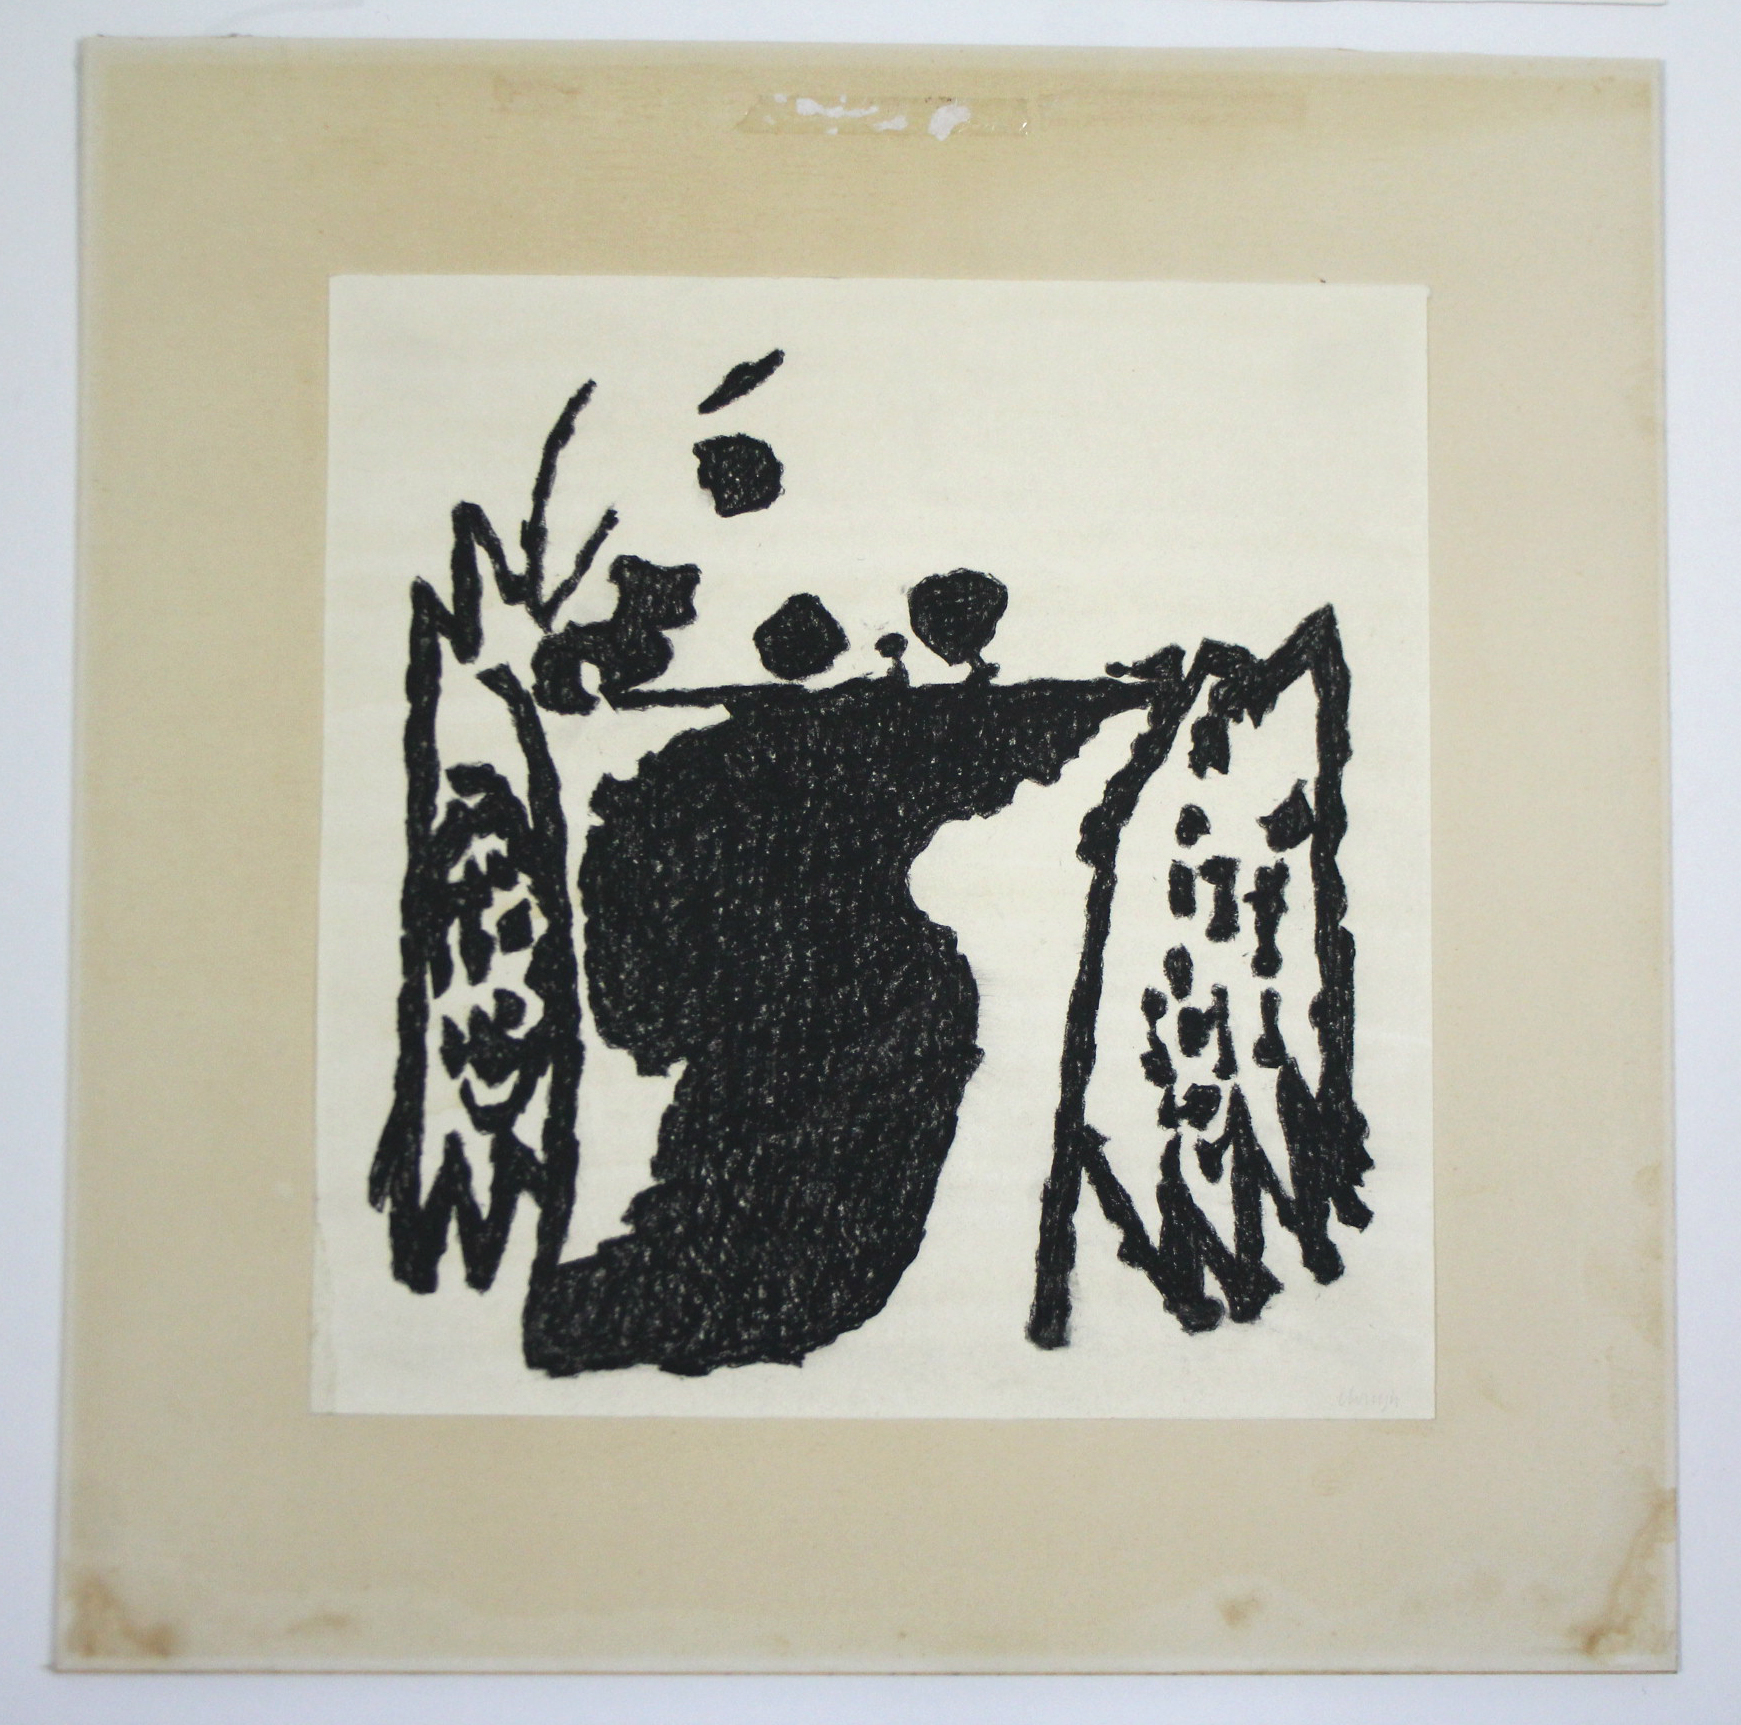 CLOUGH, Prunella (1919-2000) “Untitled Drawing No. 17, 1972”, black-&-white study, signed in - Image 2 of 6